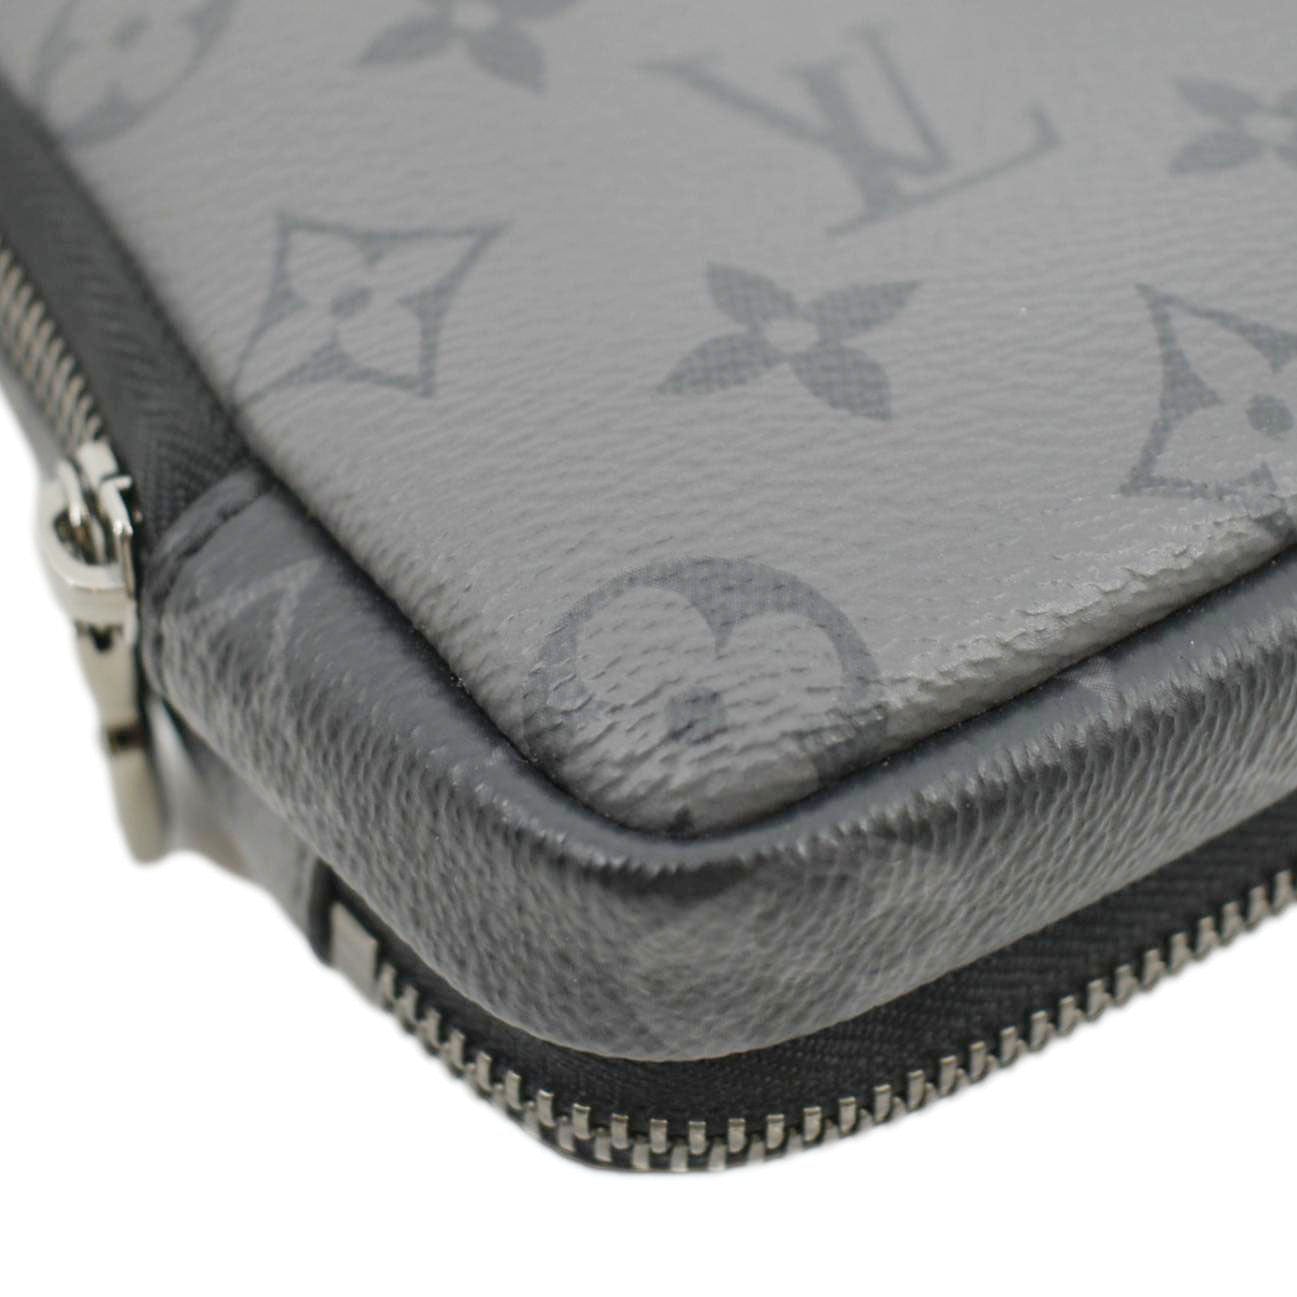 Louis Vuitton Coin Purse Monogram Eclipse Black Gray in Coated